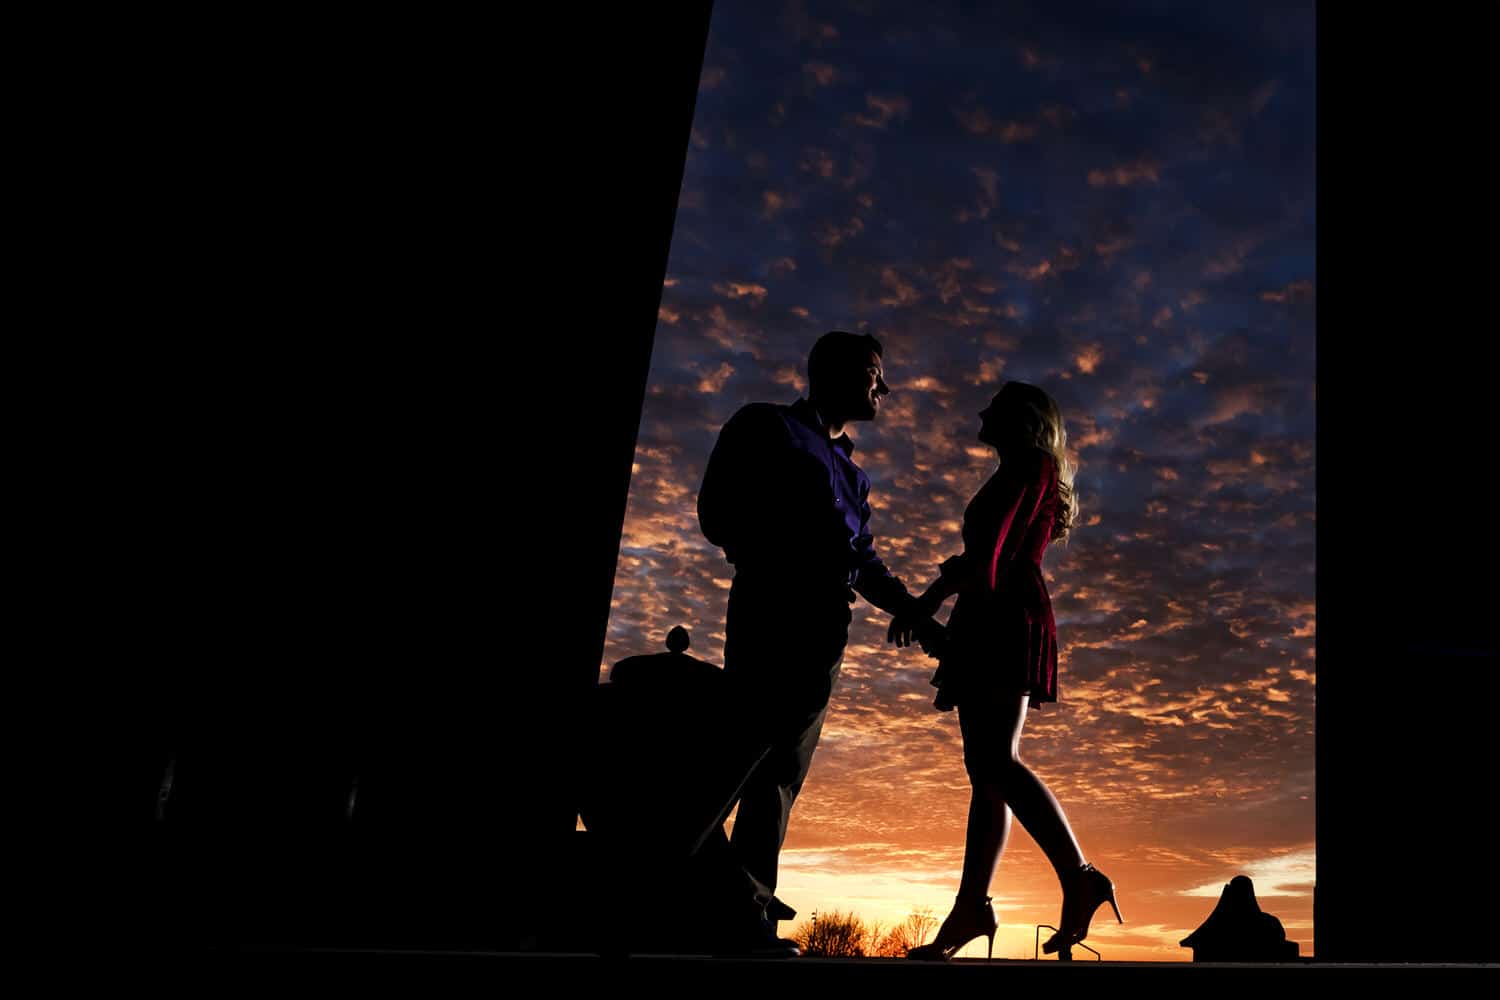 A colorful, candid picture of a vibrant sunset, a woman in high heels and a red dress walking towards a man in a purple shirt during an engagement session at Liberty Memorial in Kansas City. 